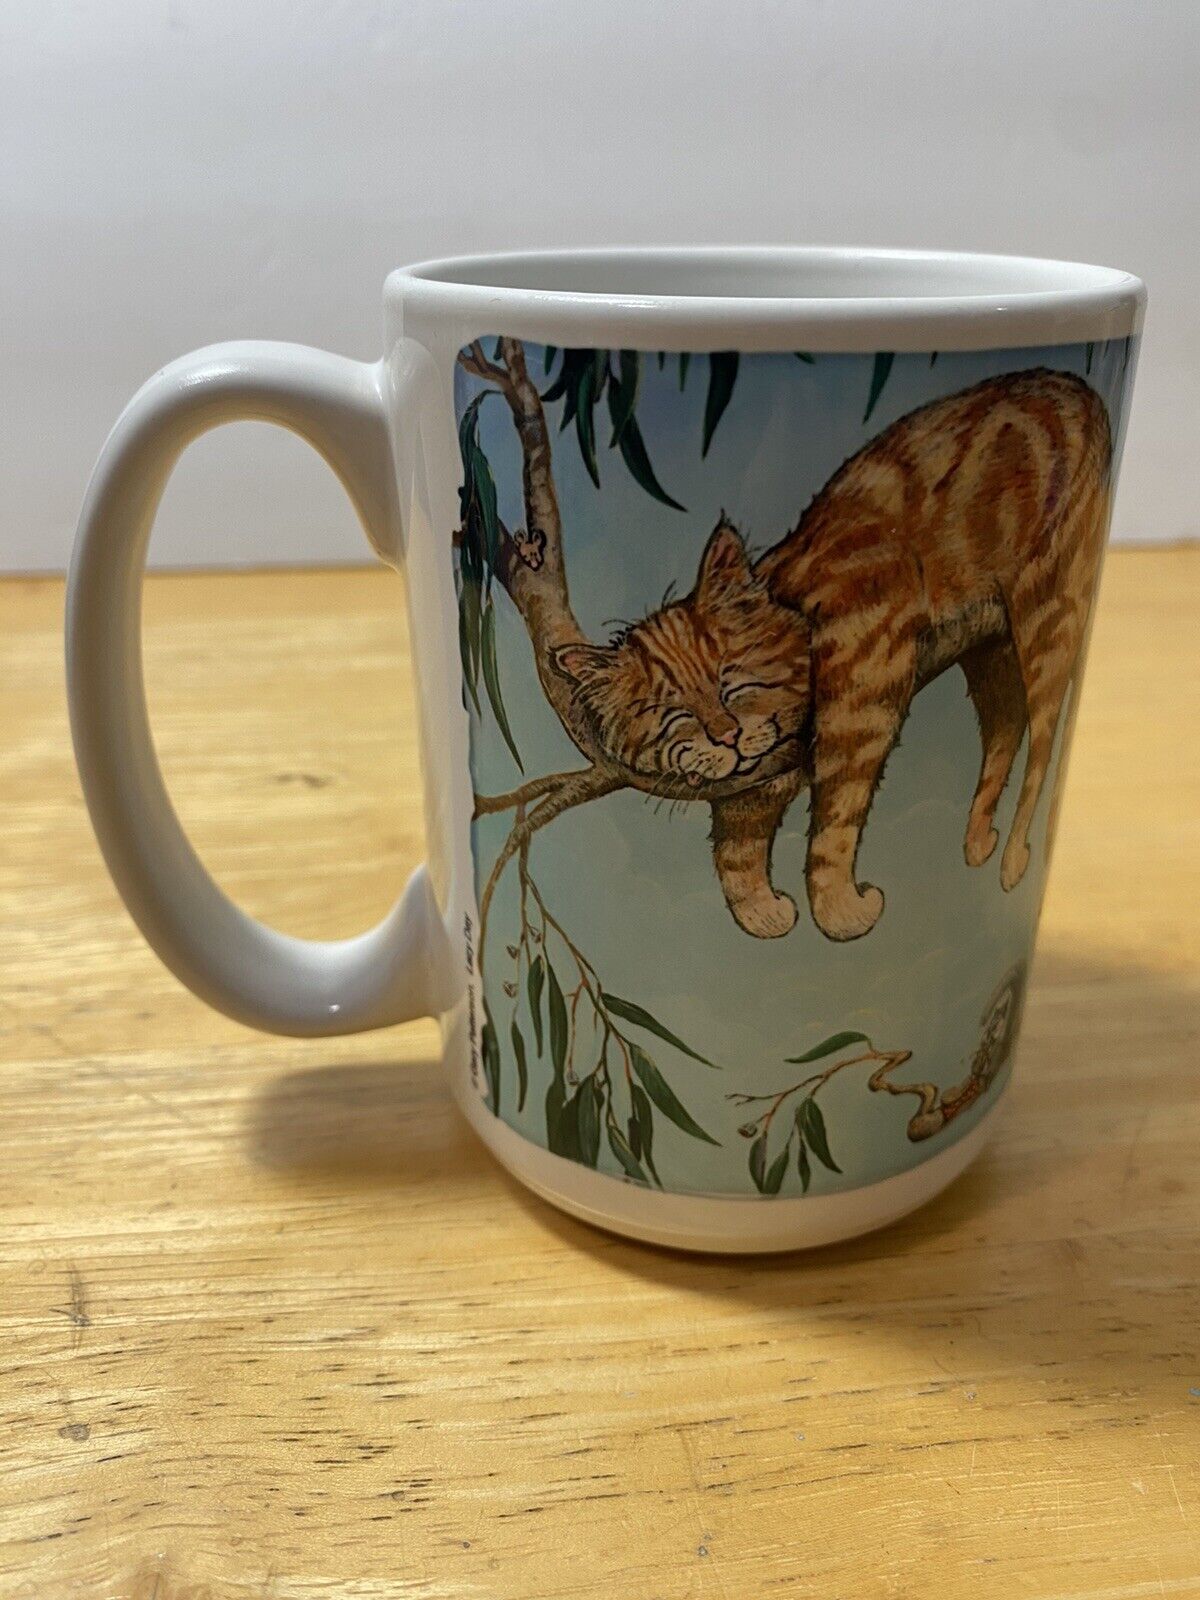 Gary Patterson Cartoon “Lazy Day” Mug Collectible Coffee Cup Cat Branch Tree